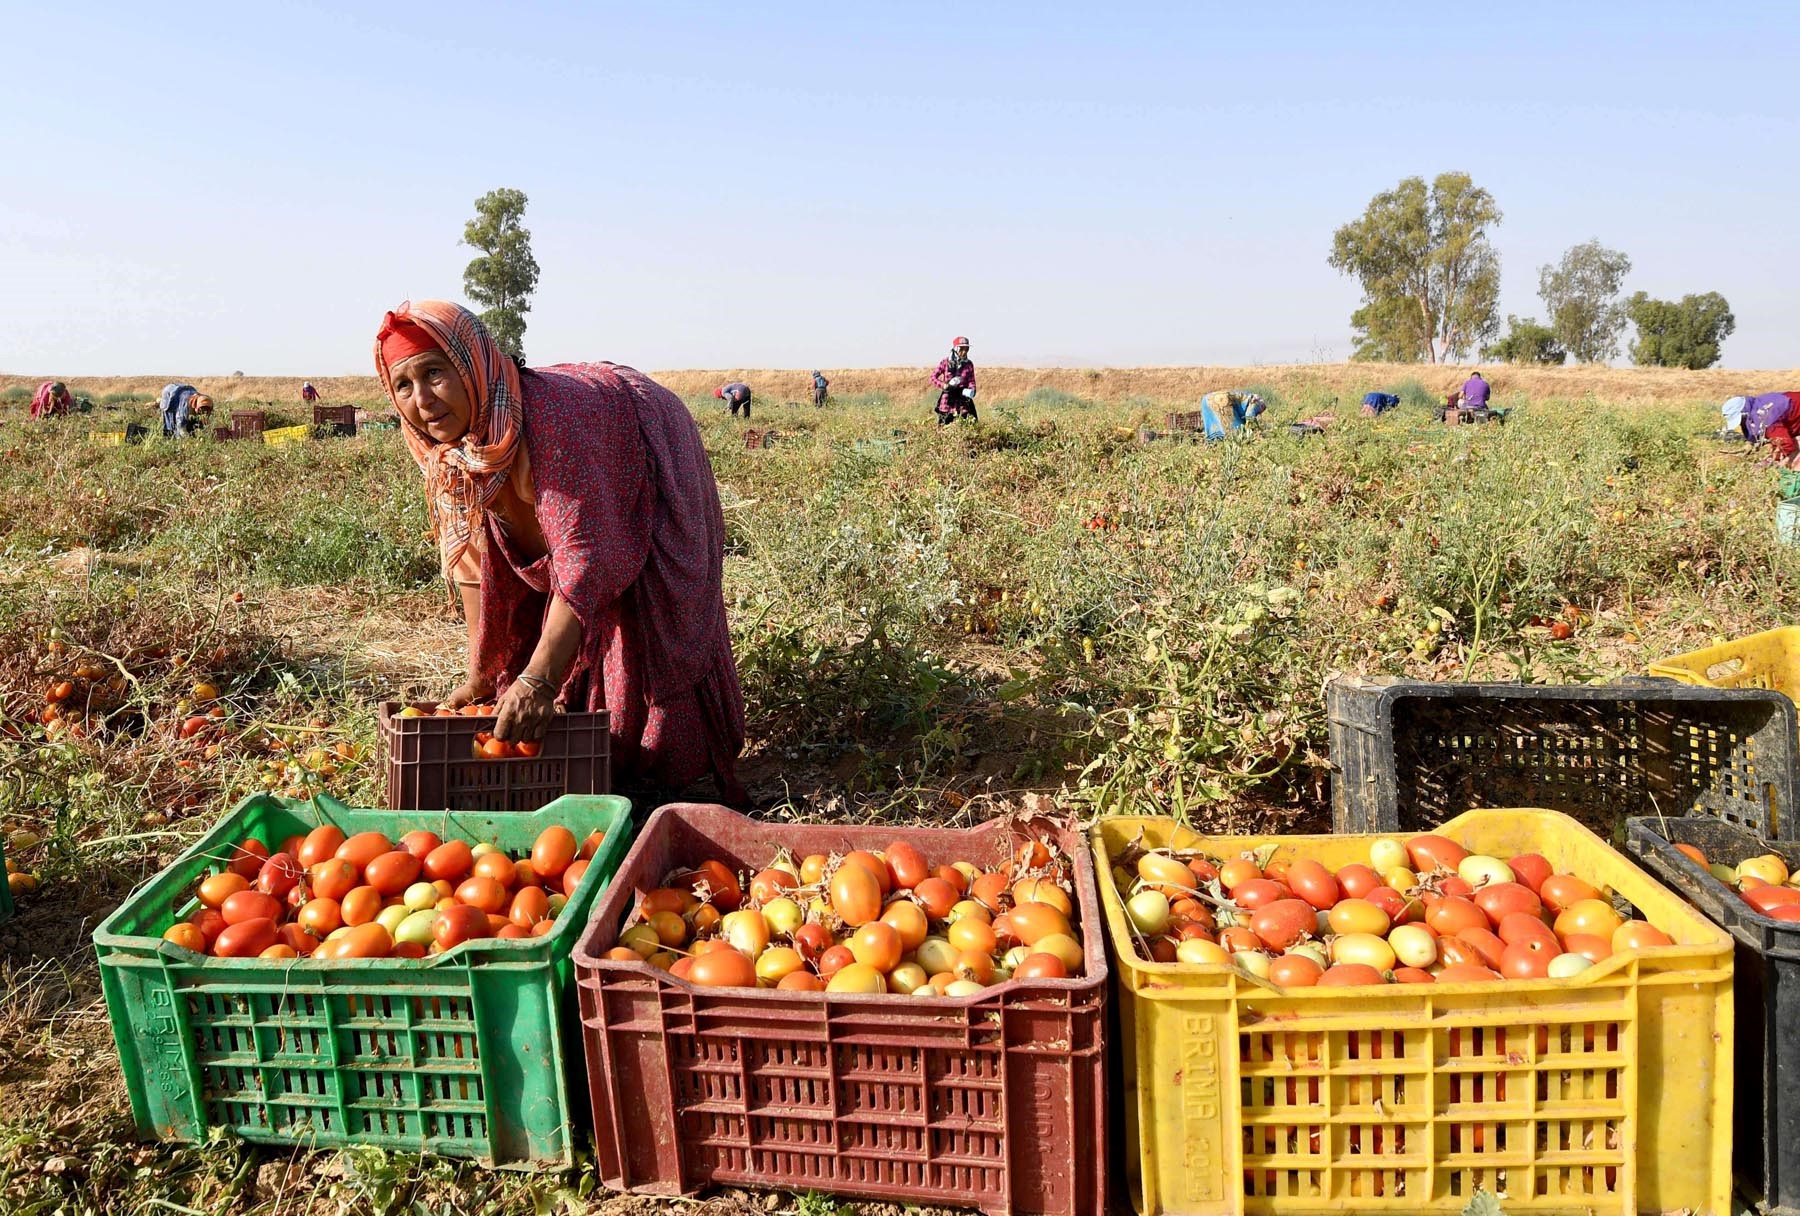 Tunisia’s farming systems wins global recognition